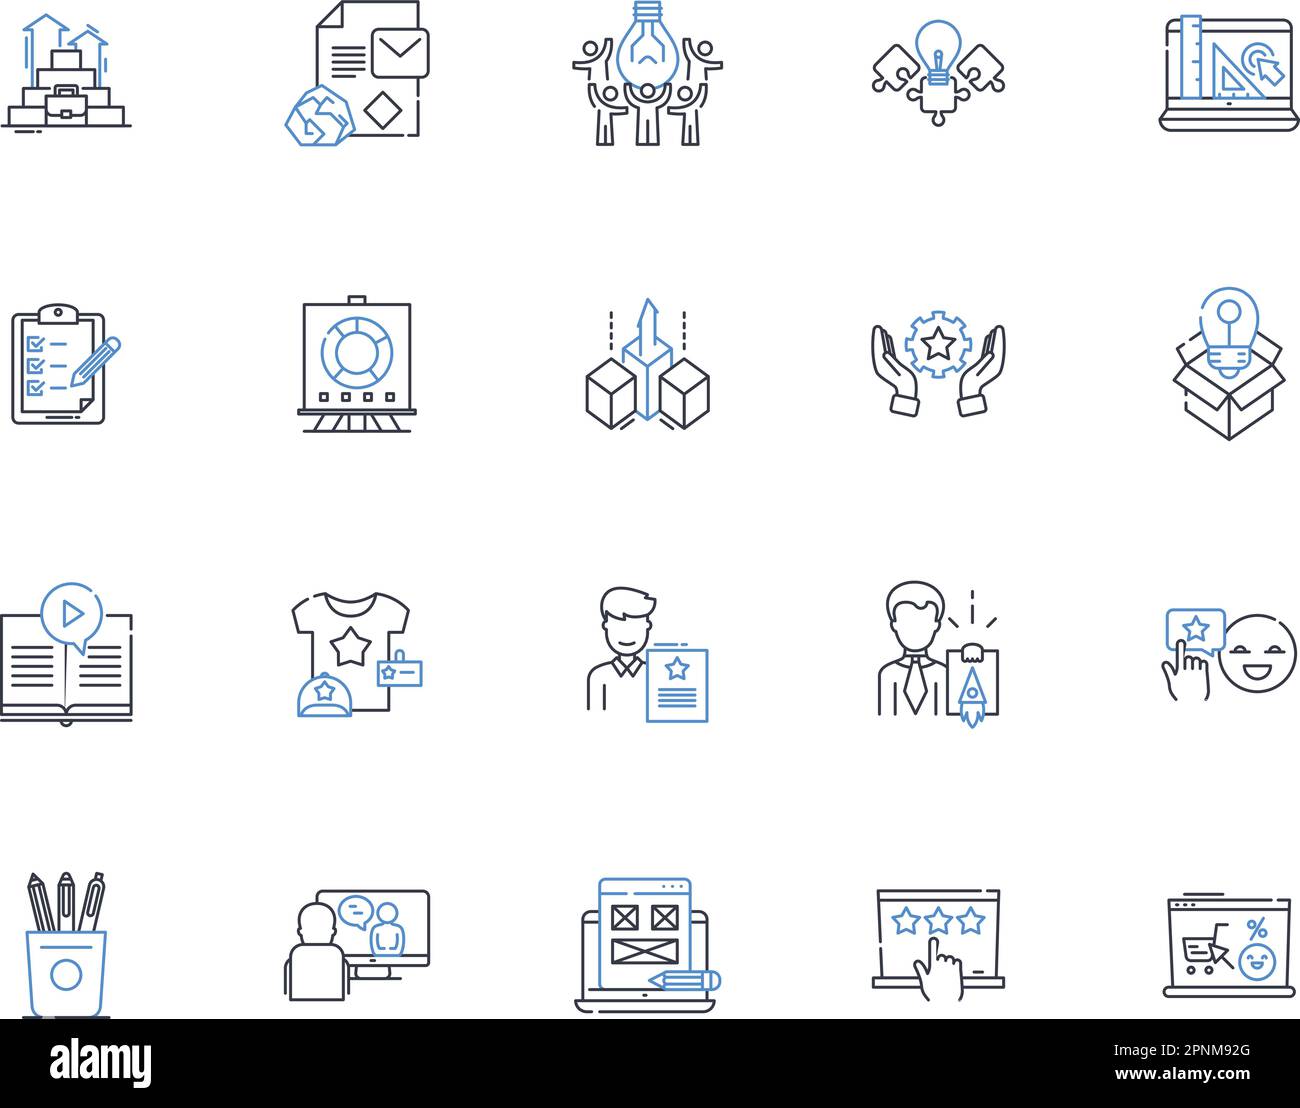 Campaigning line icons collection. Activism, Advocacy, Awareness, Boldness, Change, Charisma, Commitment vector and linear illustration. Compassion Stock Vector